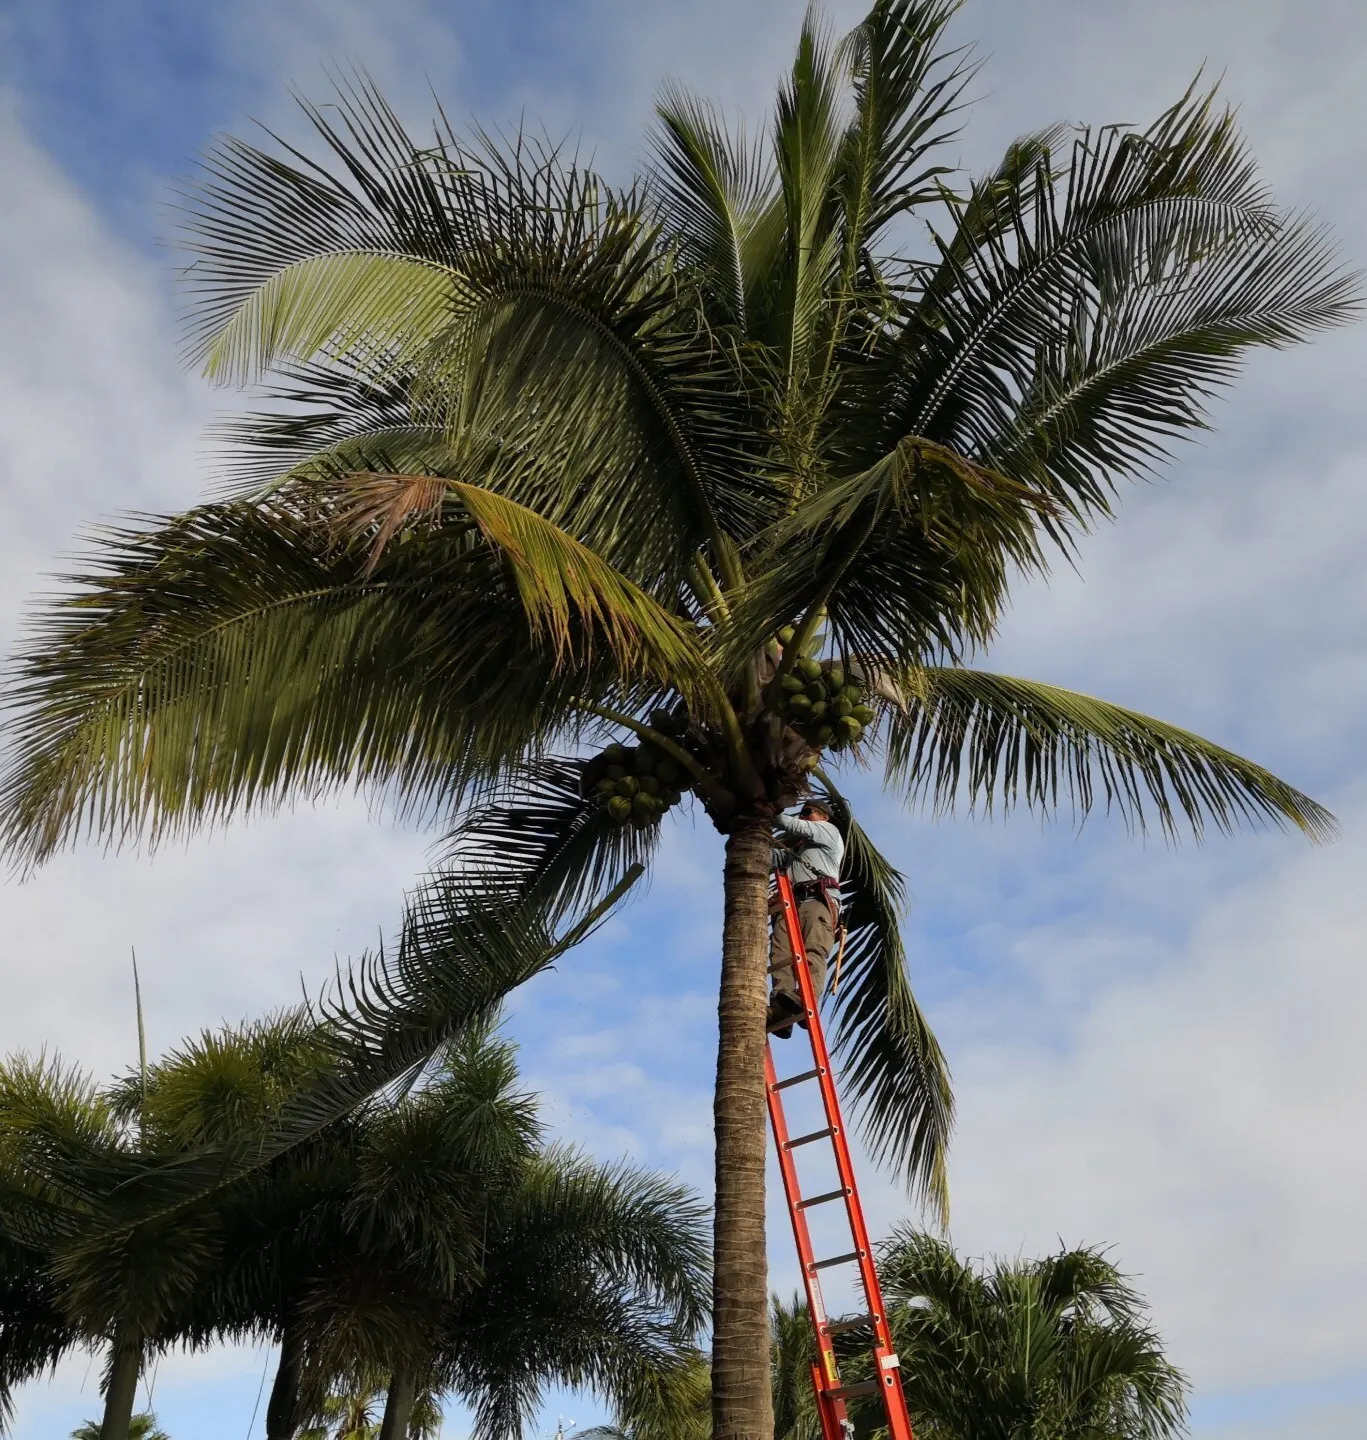 arborist in coconut palm removing dead fronds and coconuts. Service being performed in Boca Raton FL